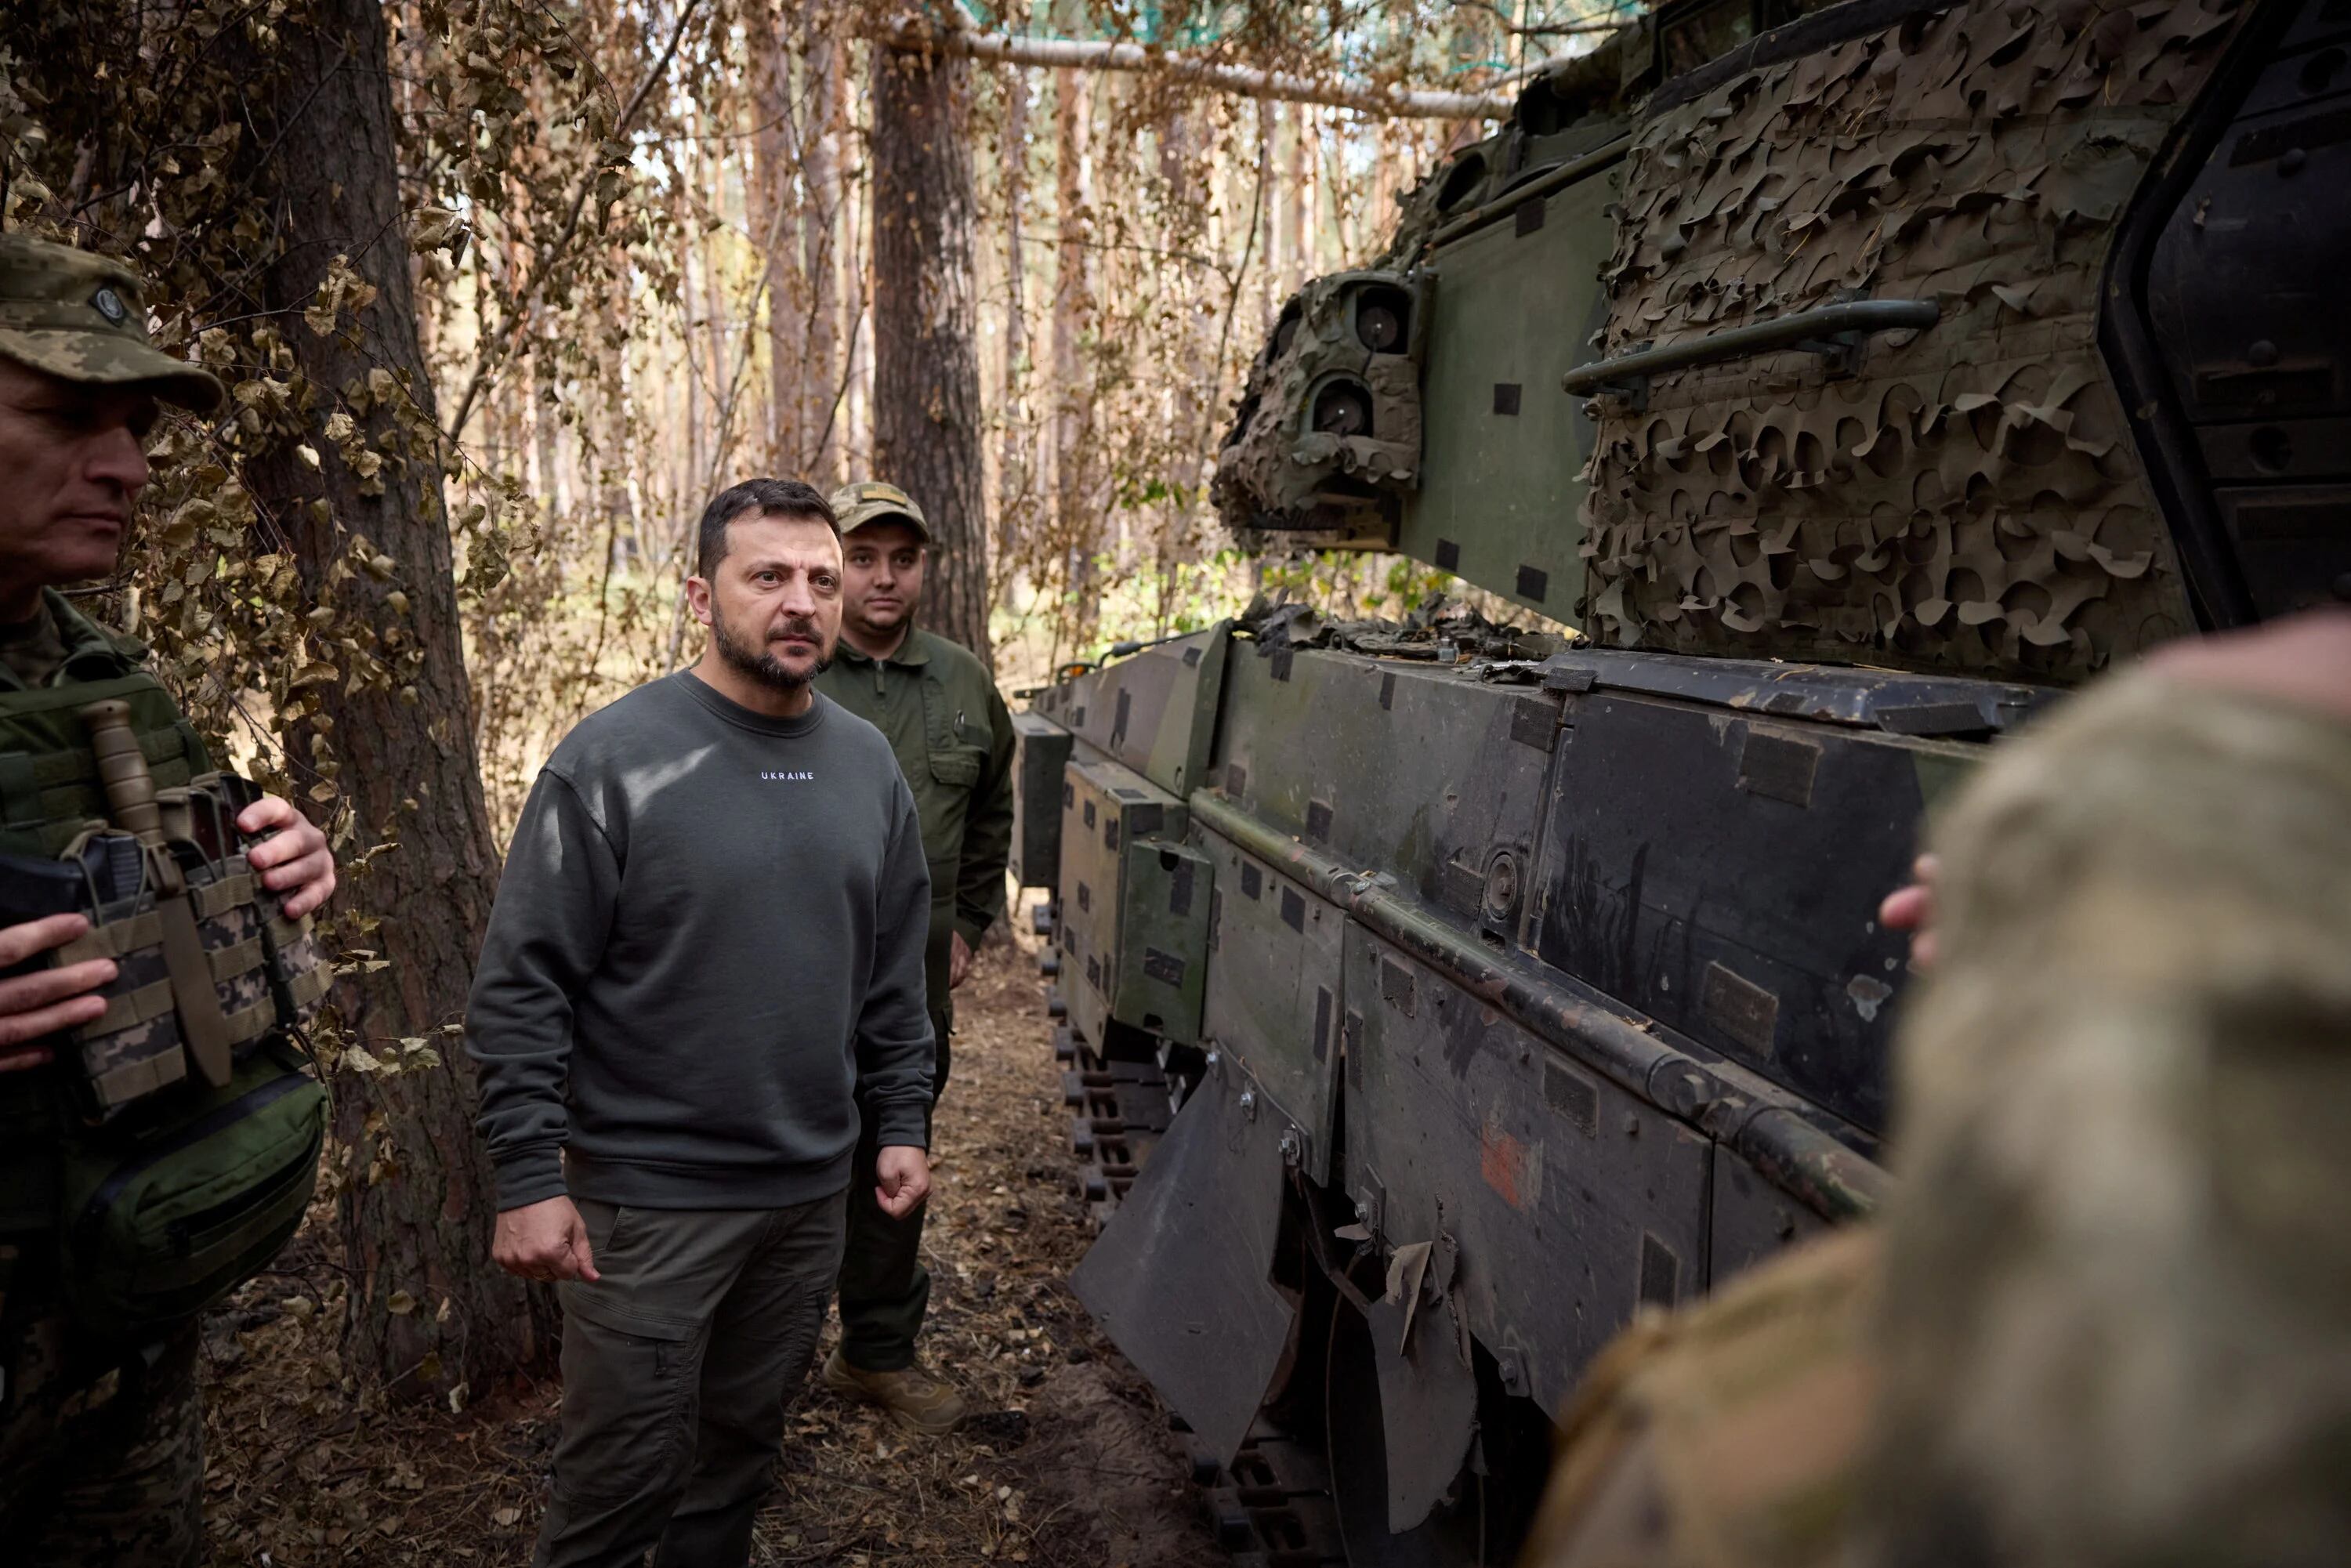 Ukraine's President Volodymyr Zelenskiy stands next to a Swedish CV90 armoured fighting vehicle as he visits a position of Ukrainian troops in a front line, amid Russia's attack on Ukraine, in an undisclosed location, Ukraine October 3, 2023. Ukrainian Presidential Press Service/Handout via REUTERS ATTENTION EDITORS - THIS IMAGE HAS BEEN SUPPLIED BY A THIRD PARTY.